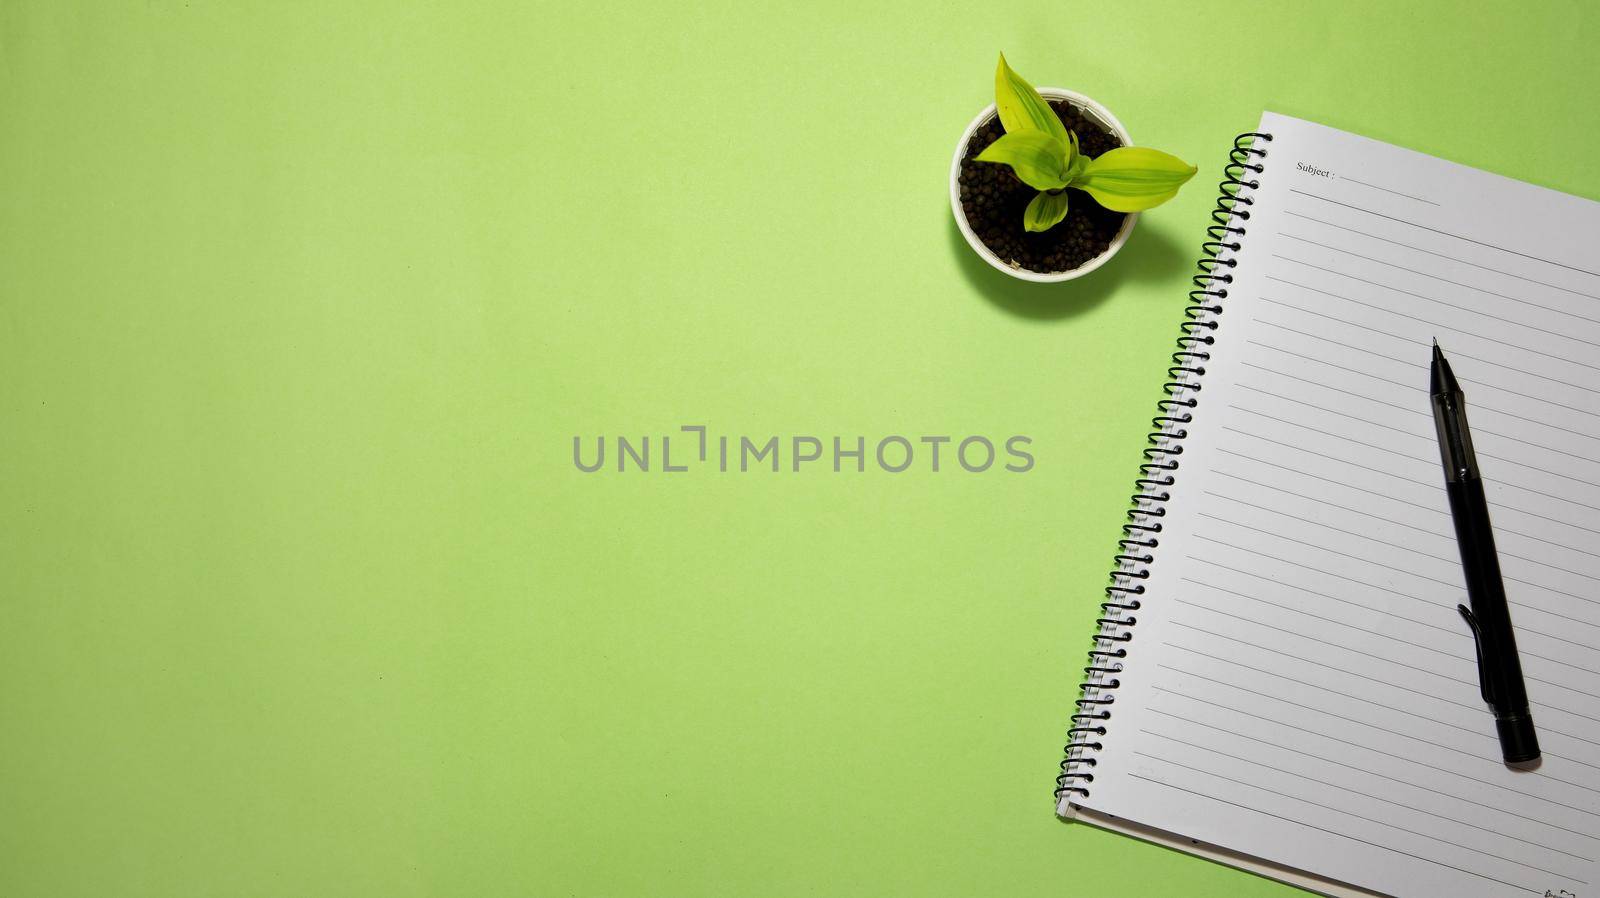 Flat lay black to school and education concept on green background with blank notepad, pencil, green plant and supplies.